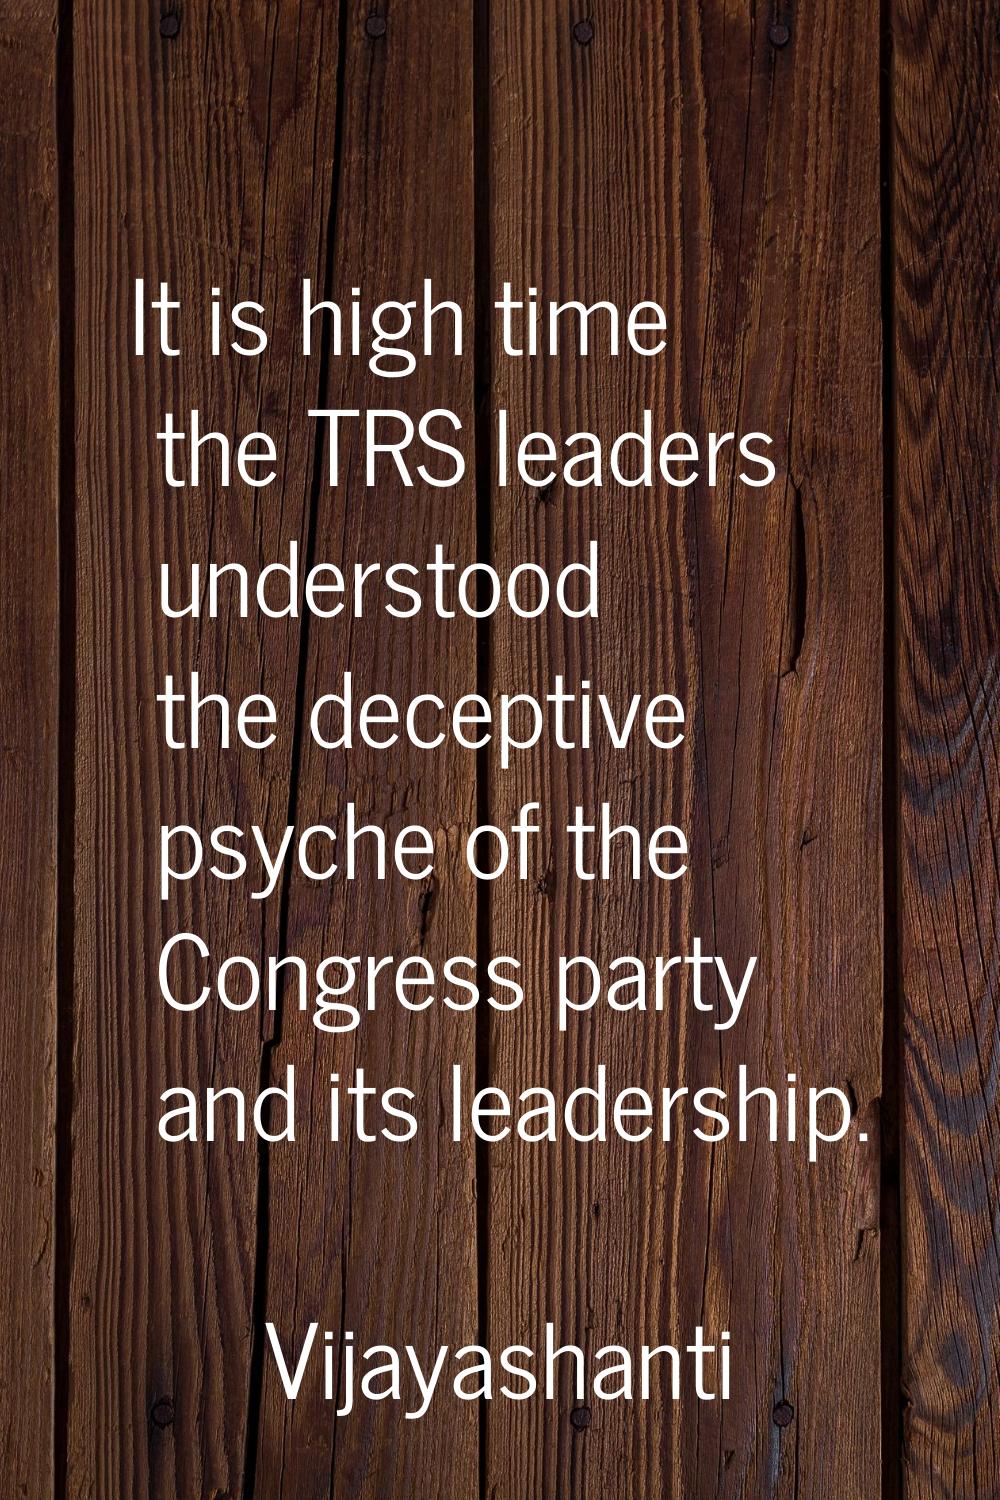 It is high time the TRS leaders understood the deceptive psyche of the Congress party and its leade